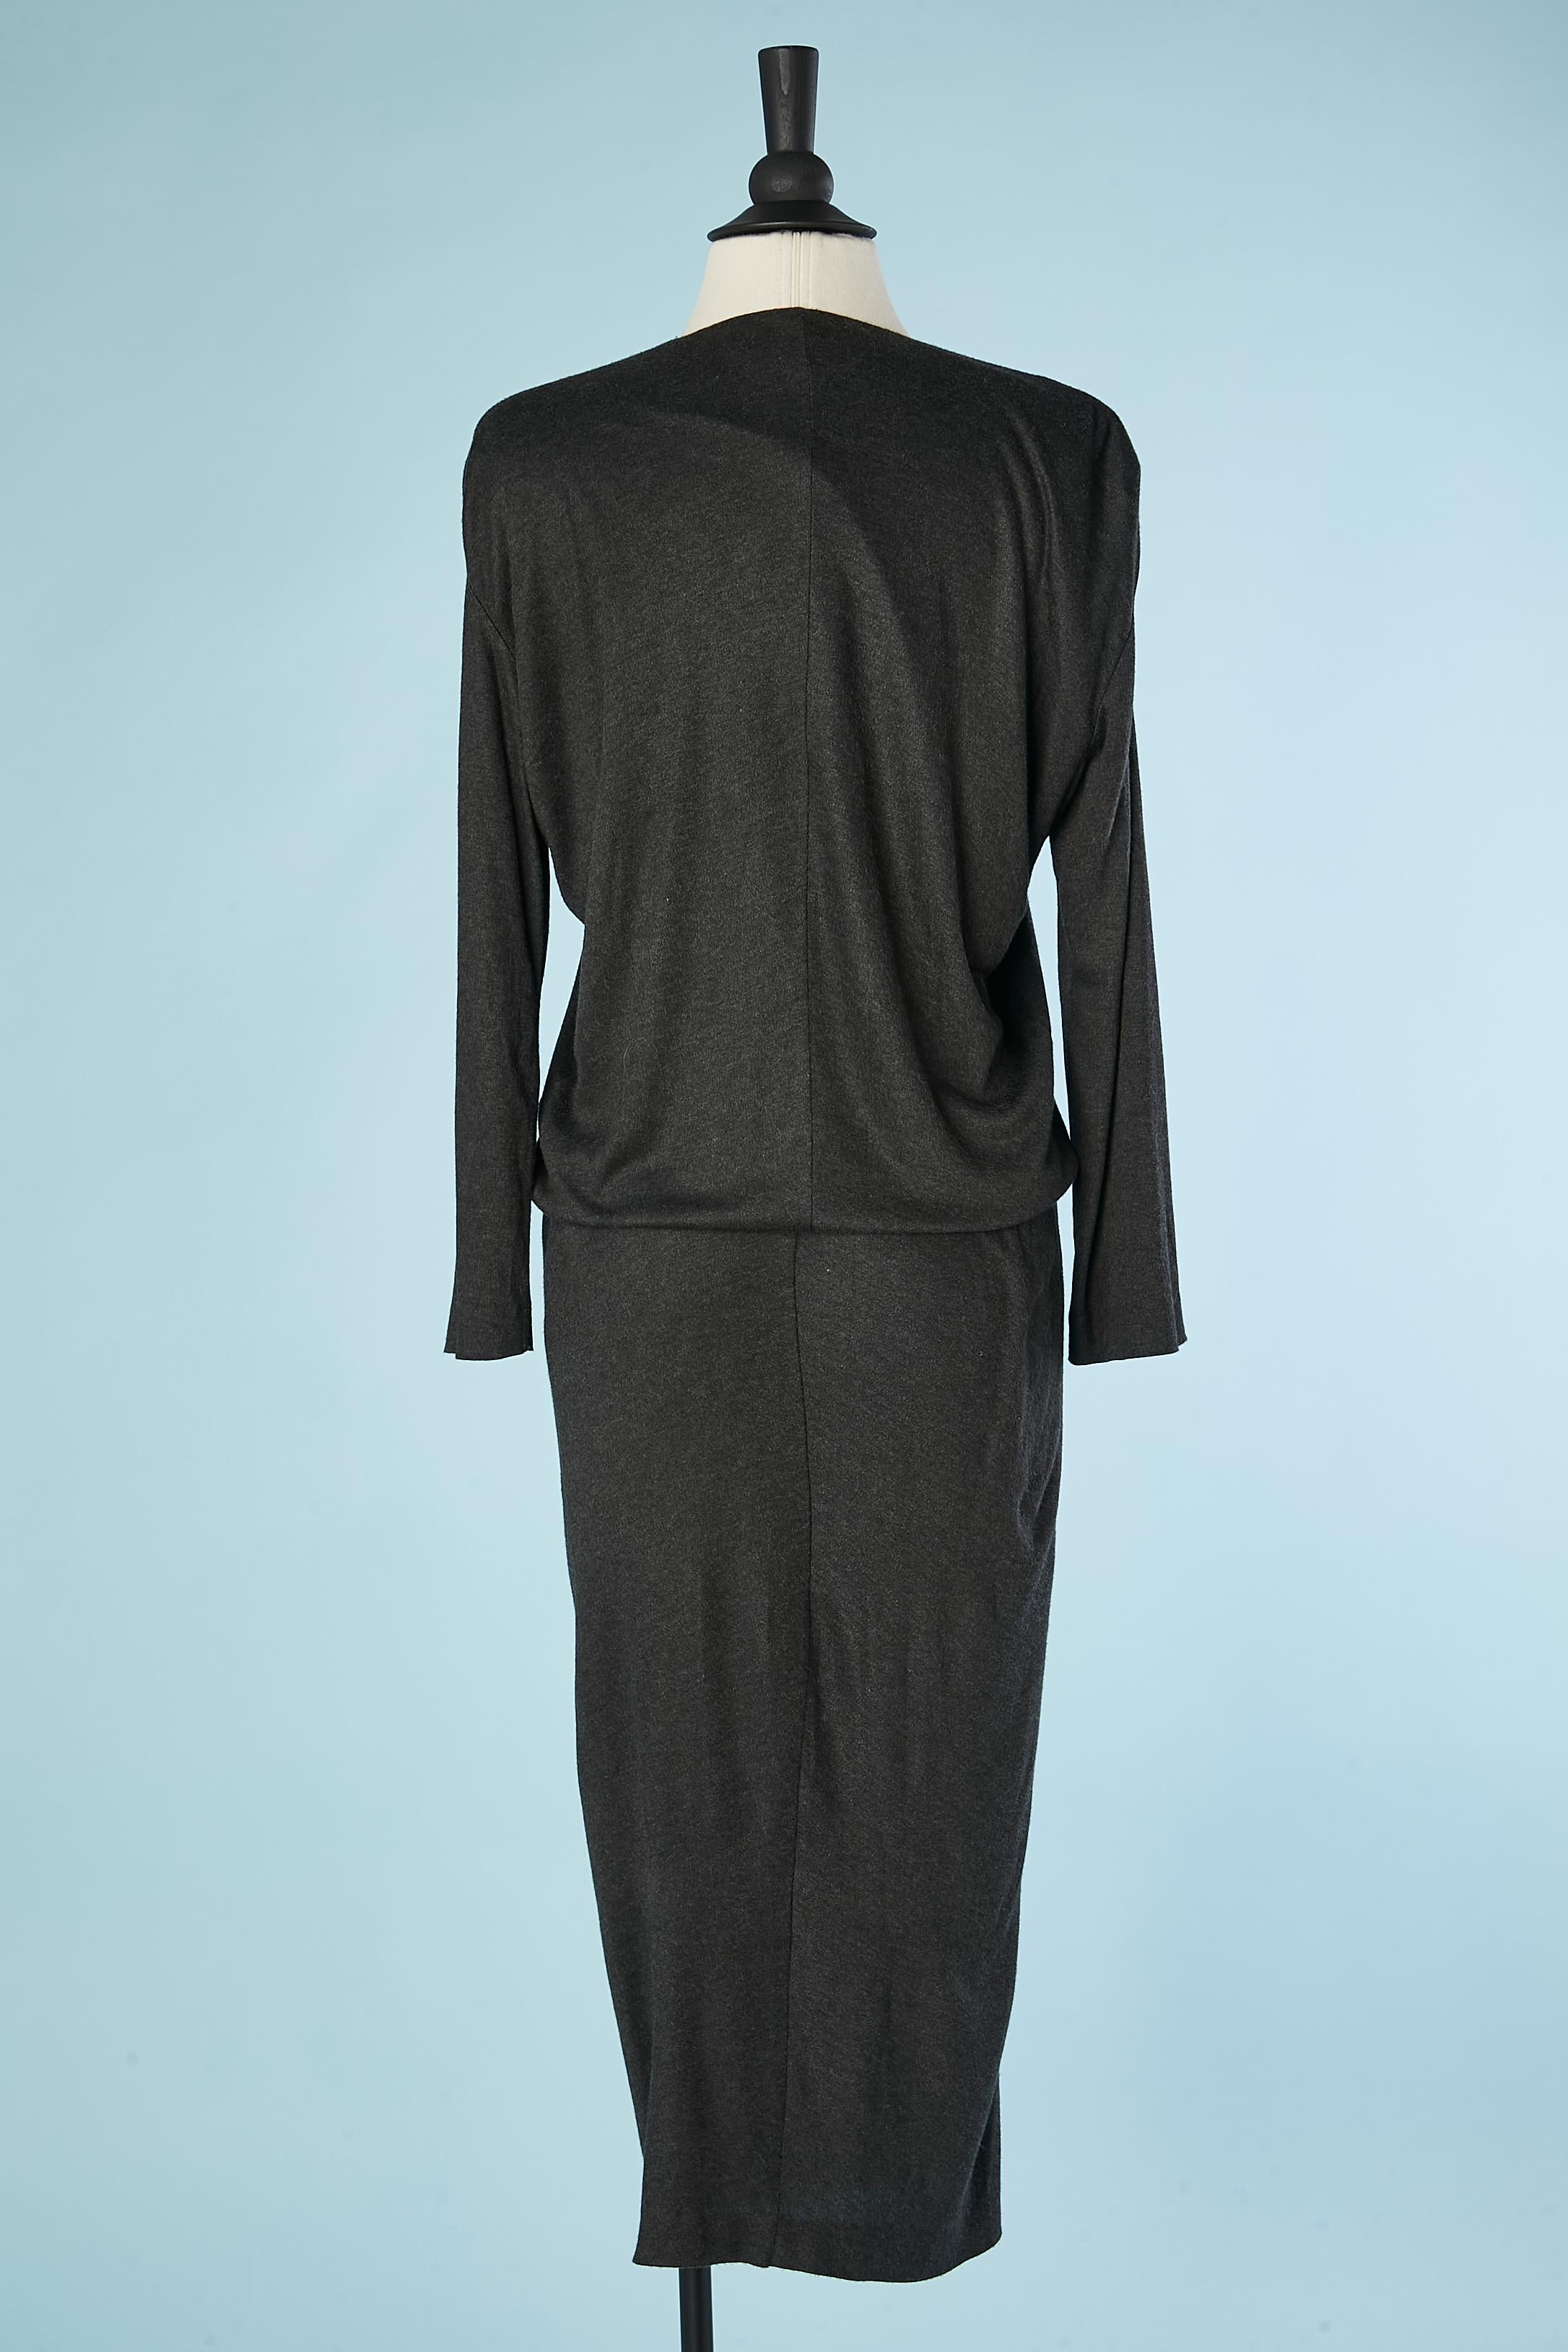 Anthracite drape jersey dress with bow in the middle front Yves Saint Laurent  In Excellent Condition For Sale In Saint-Ouen-Sur-Seine, FR